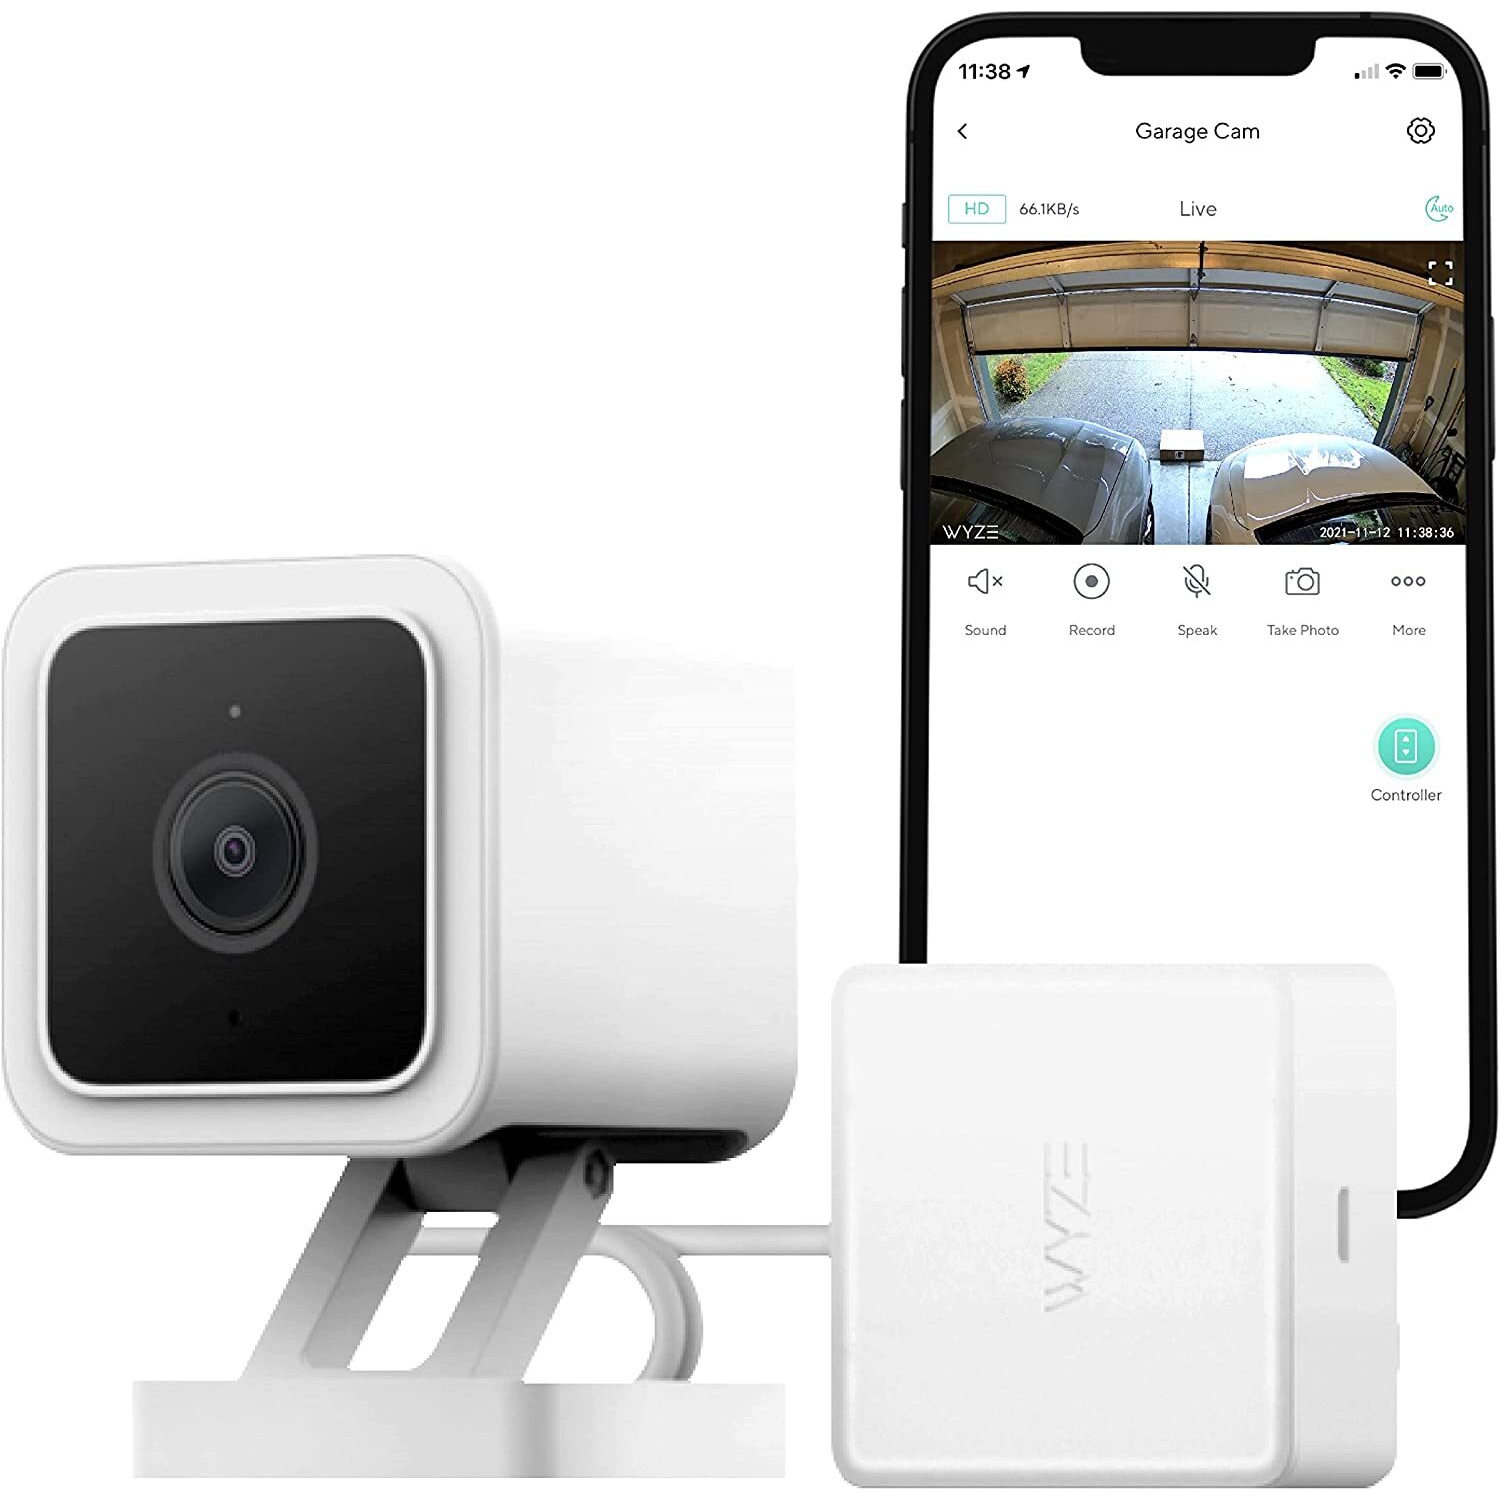 Are there security camera options for garage doors?